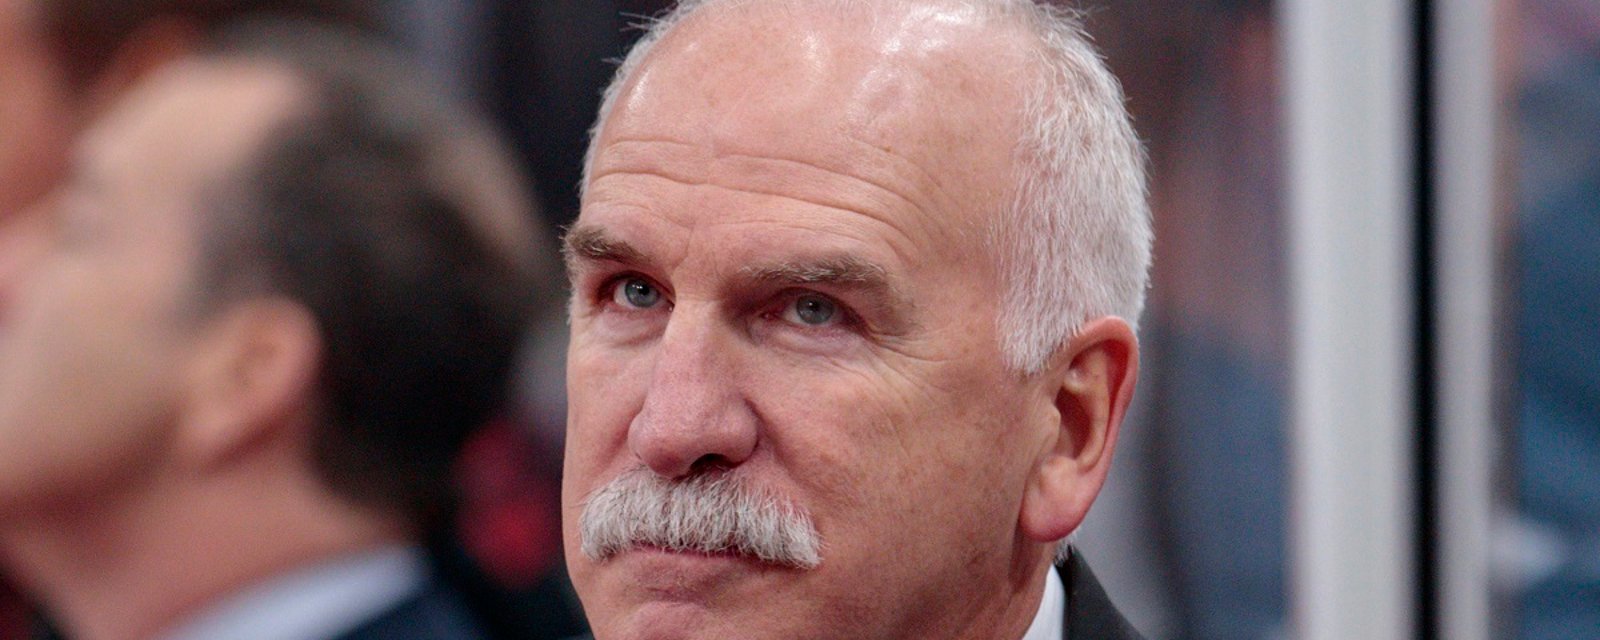 Joel Quenneville says he needs Bobrovski to be “great” in the playoffs.